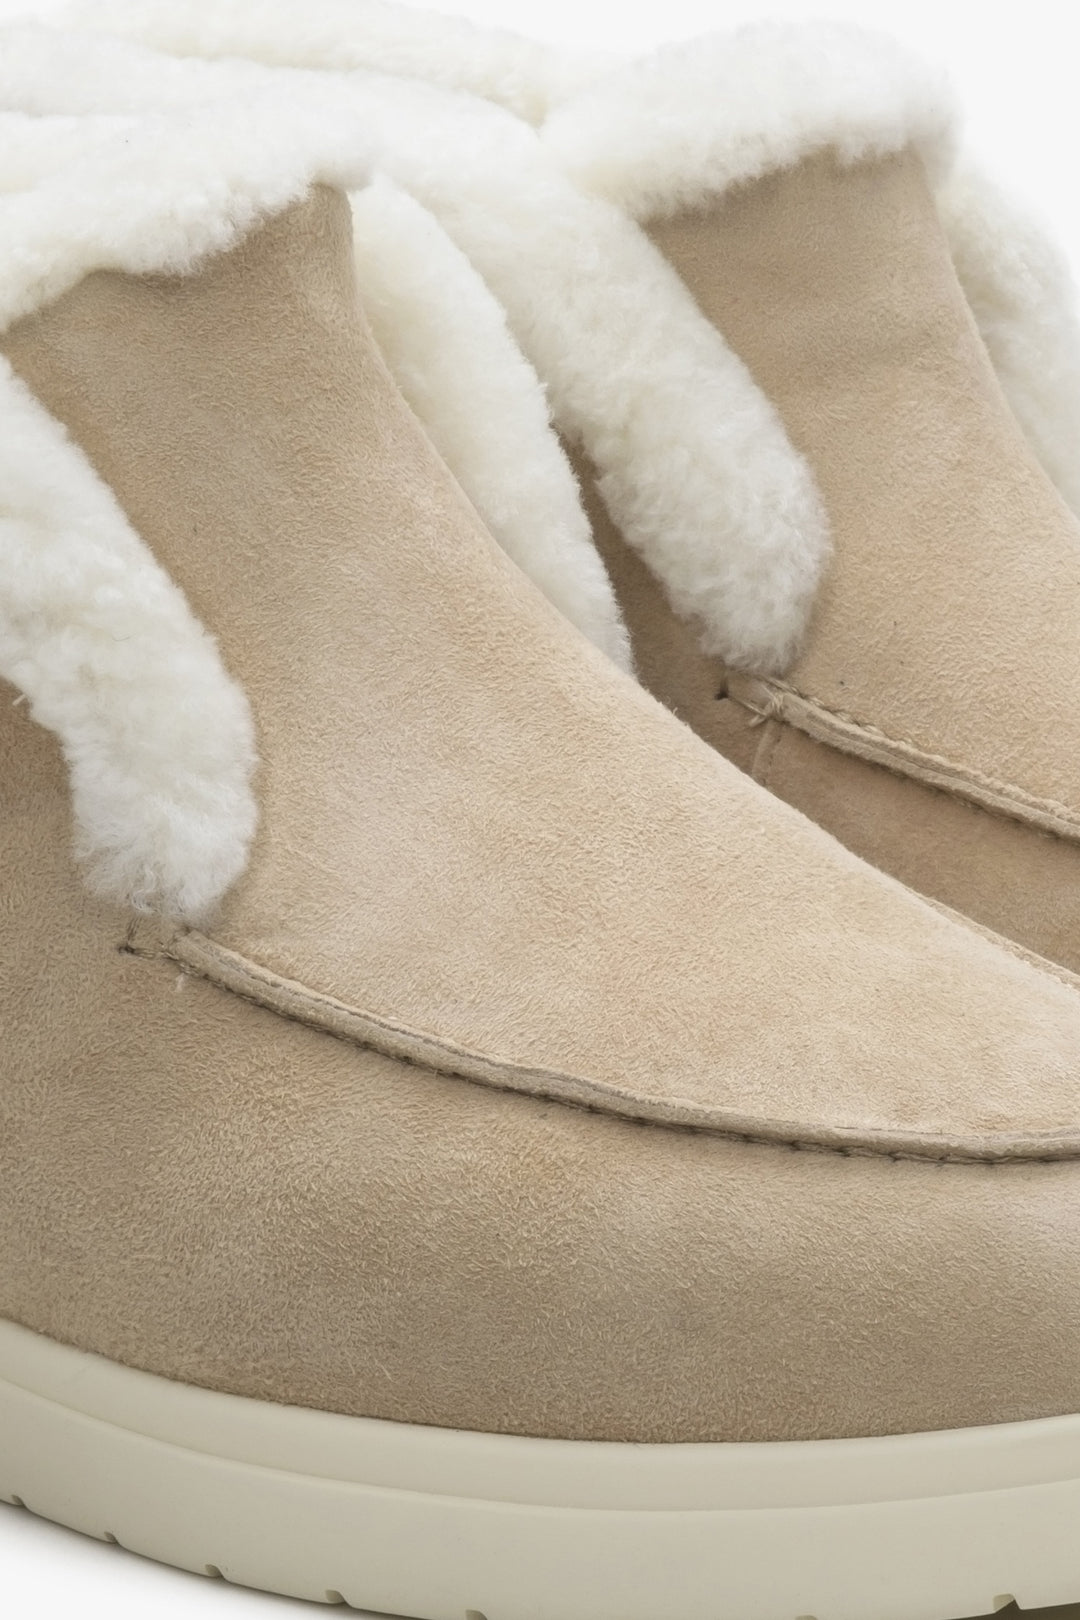 Women's fur and velour ankle boots in light beige colour.